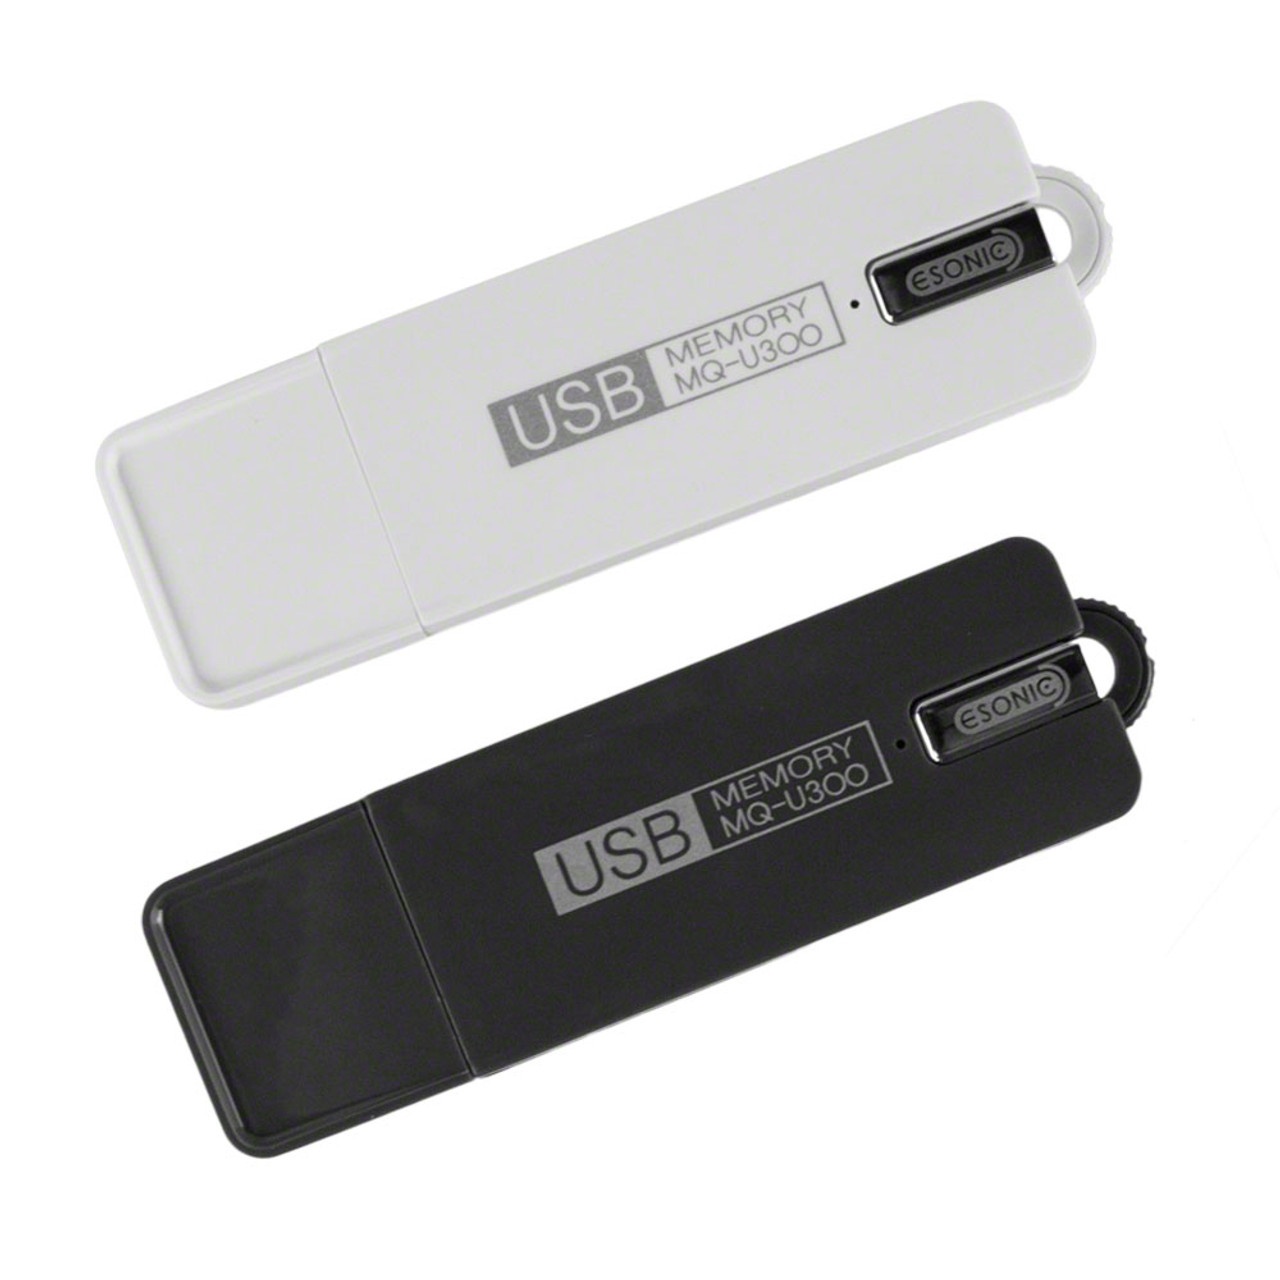 USB Drive Voice Recorder with Up to 25 Day Battery Life - Security